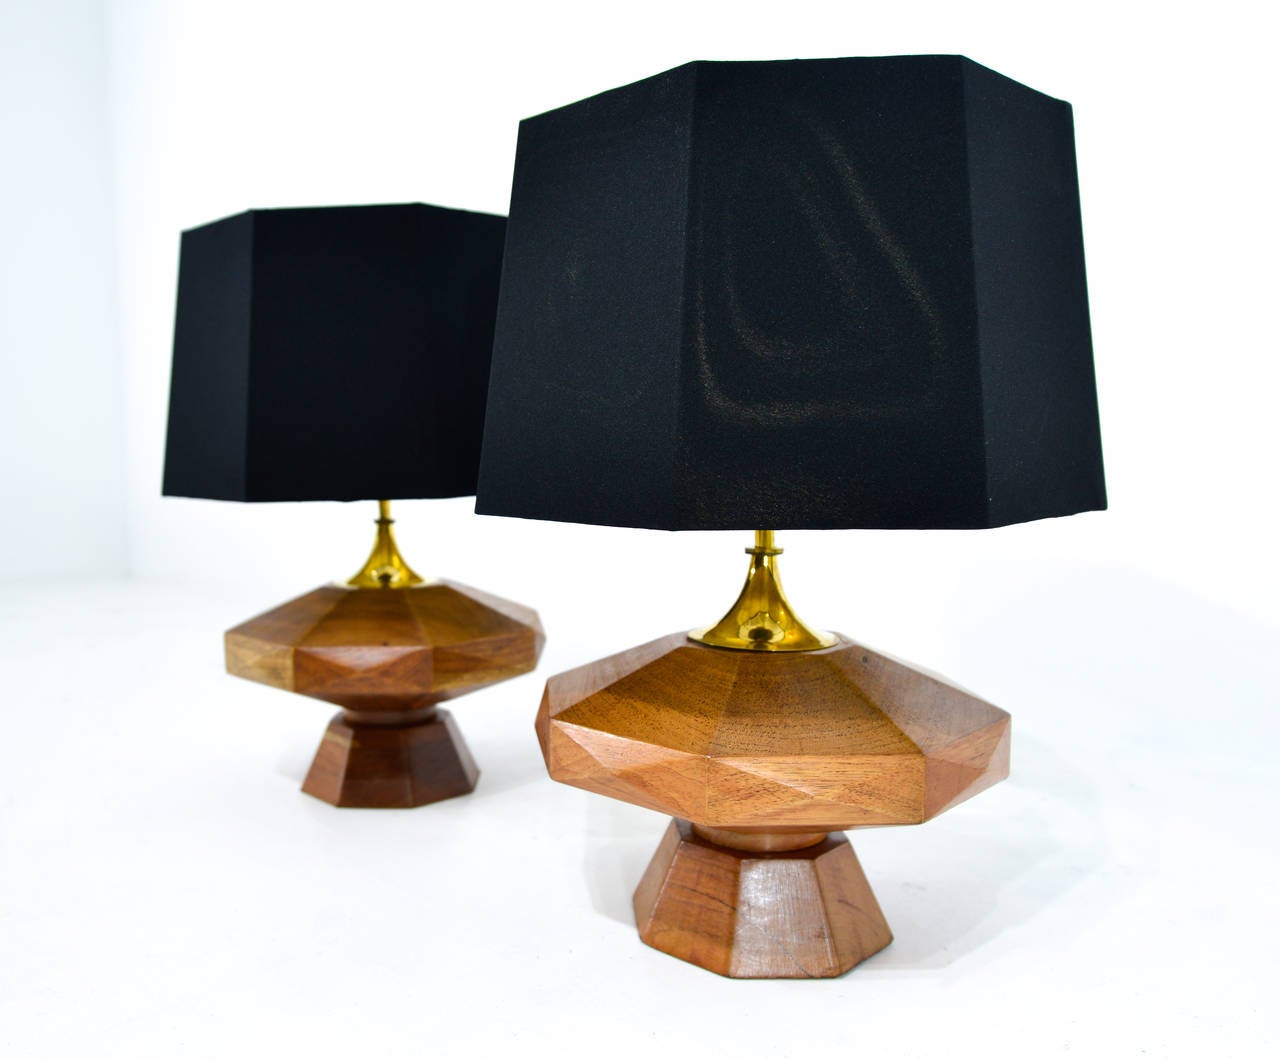 Mexican Arturo Pani Pair of Table Lamps